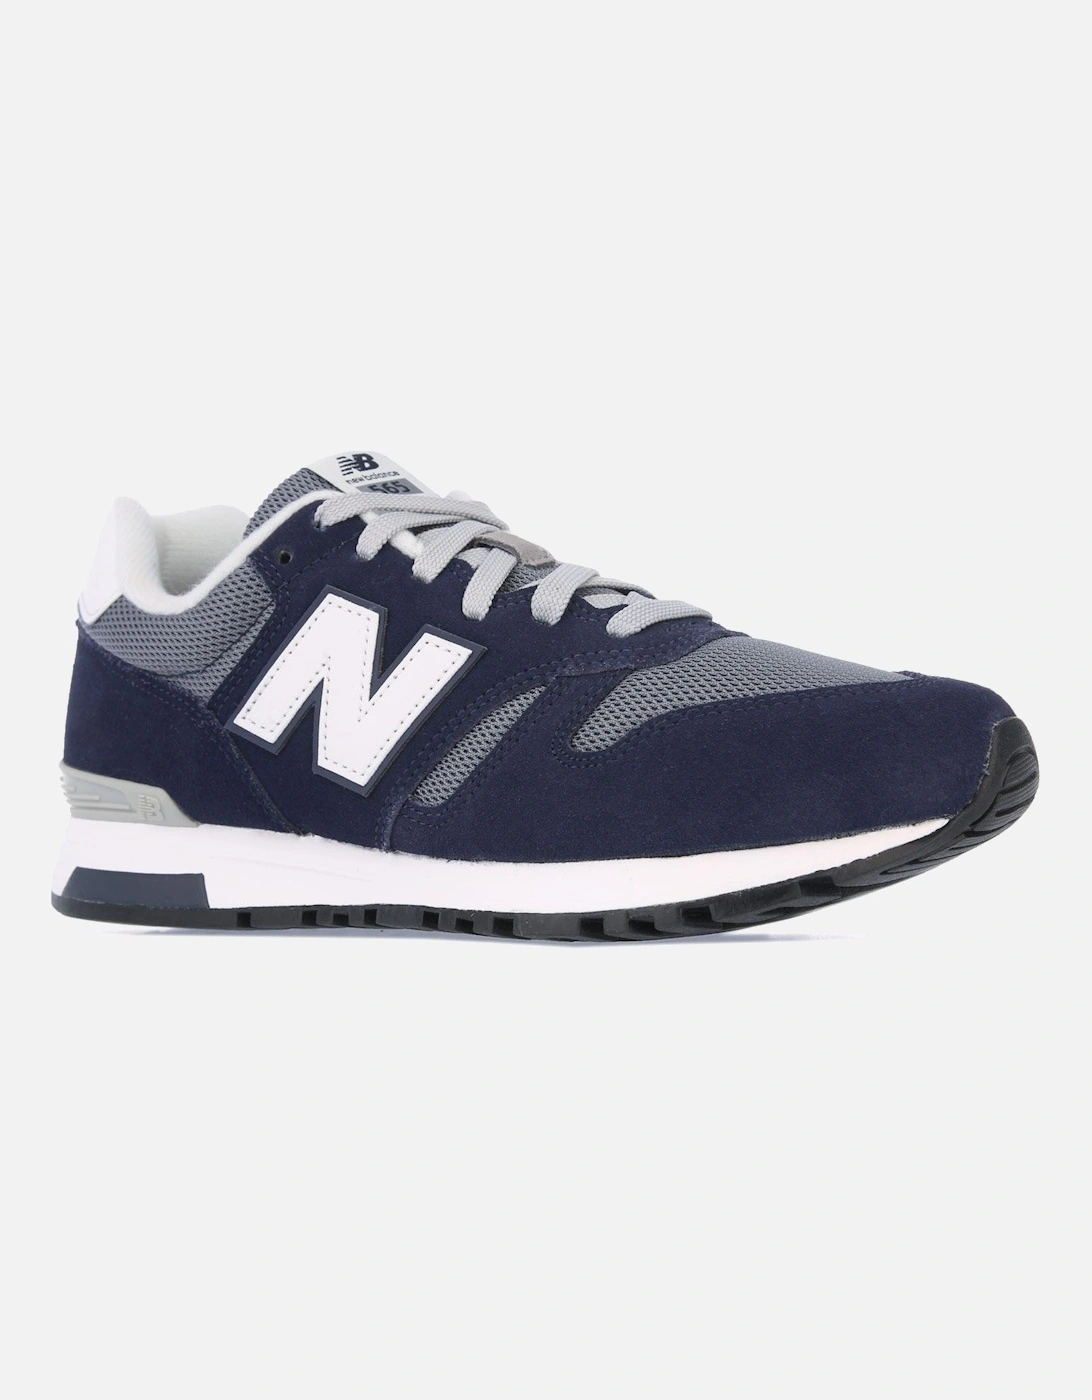 Mens 565 Trainers